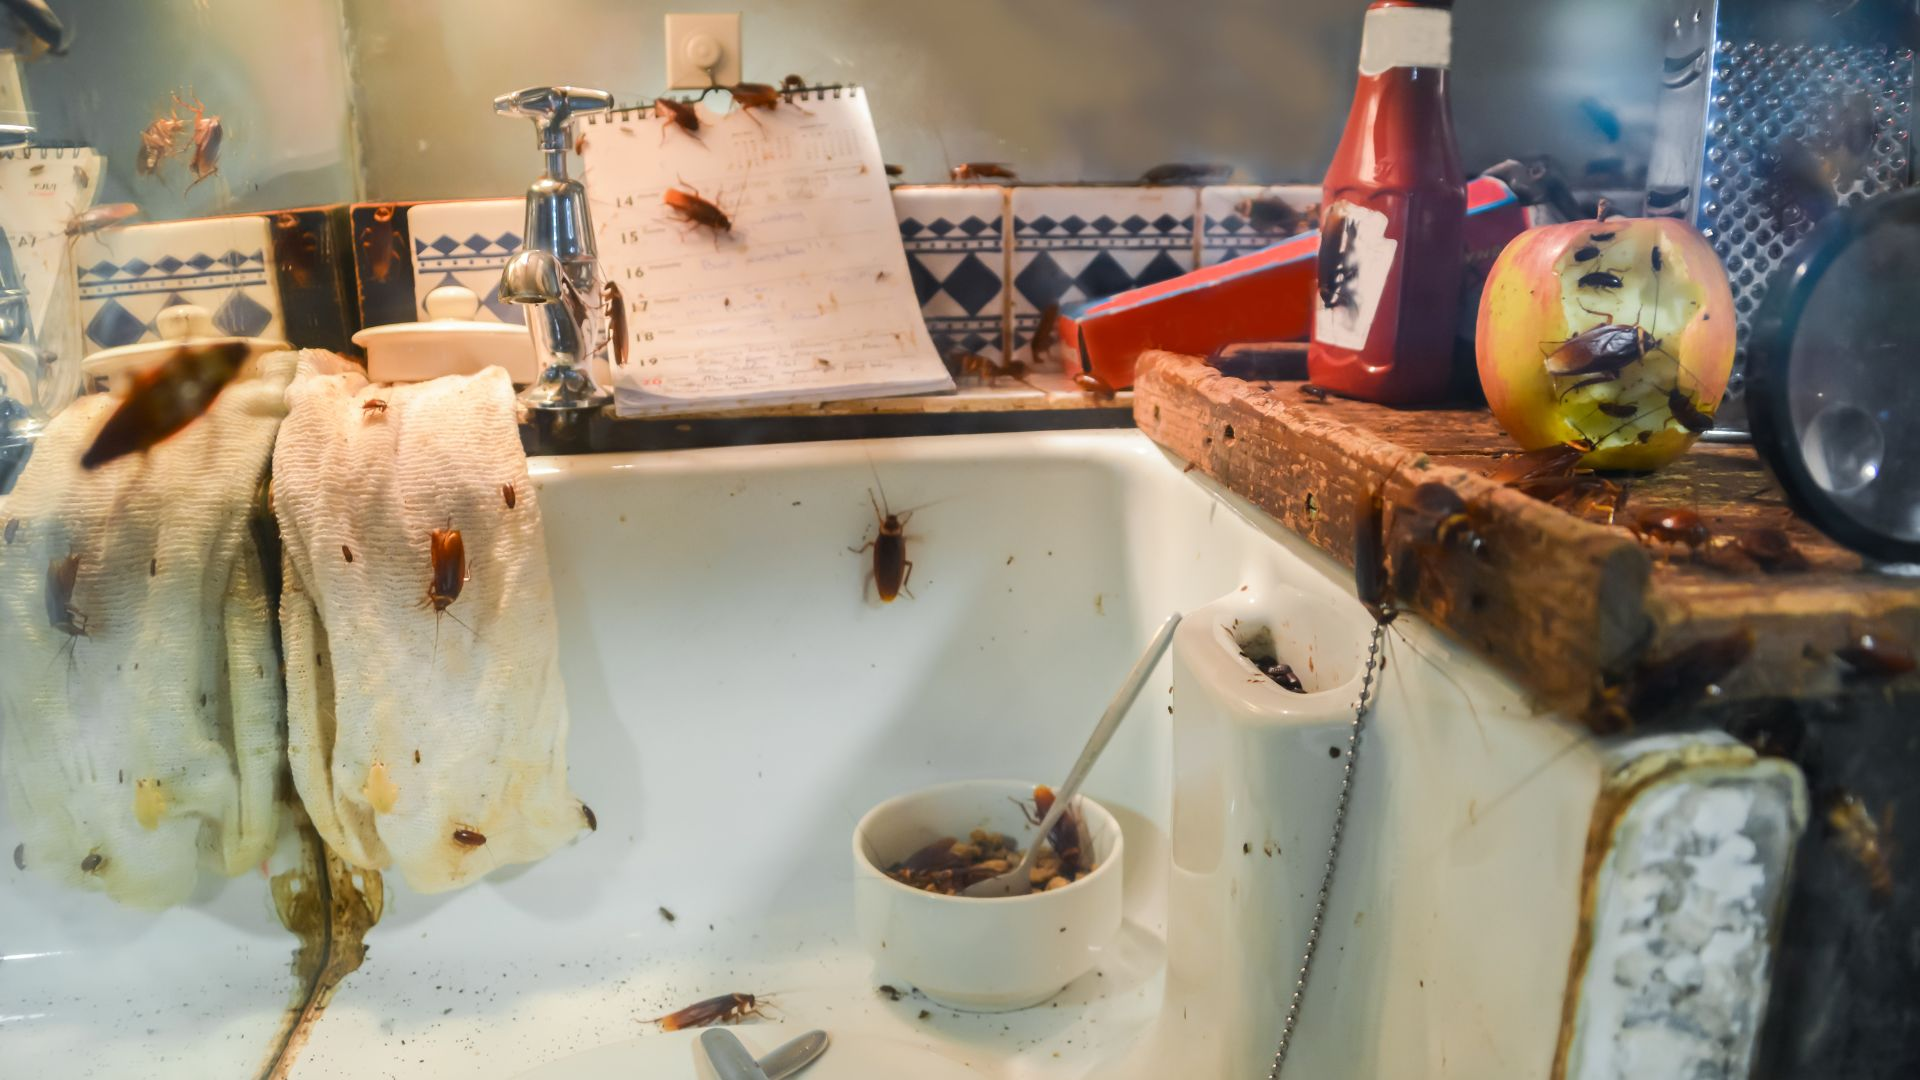 An image of cockroaches invading the area around a sink. 